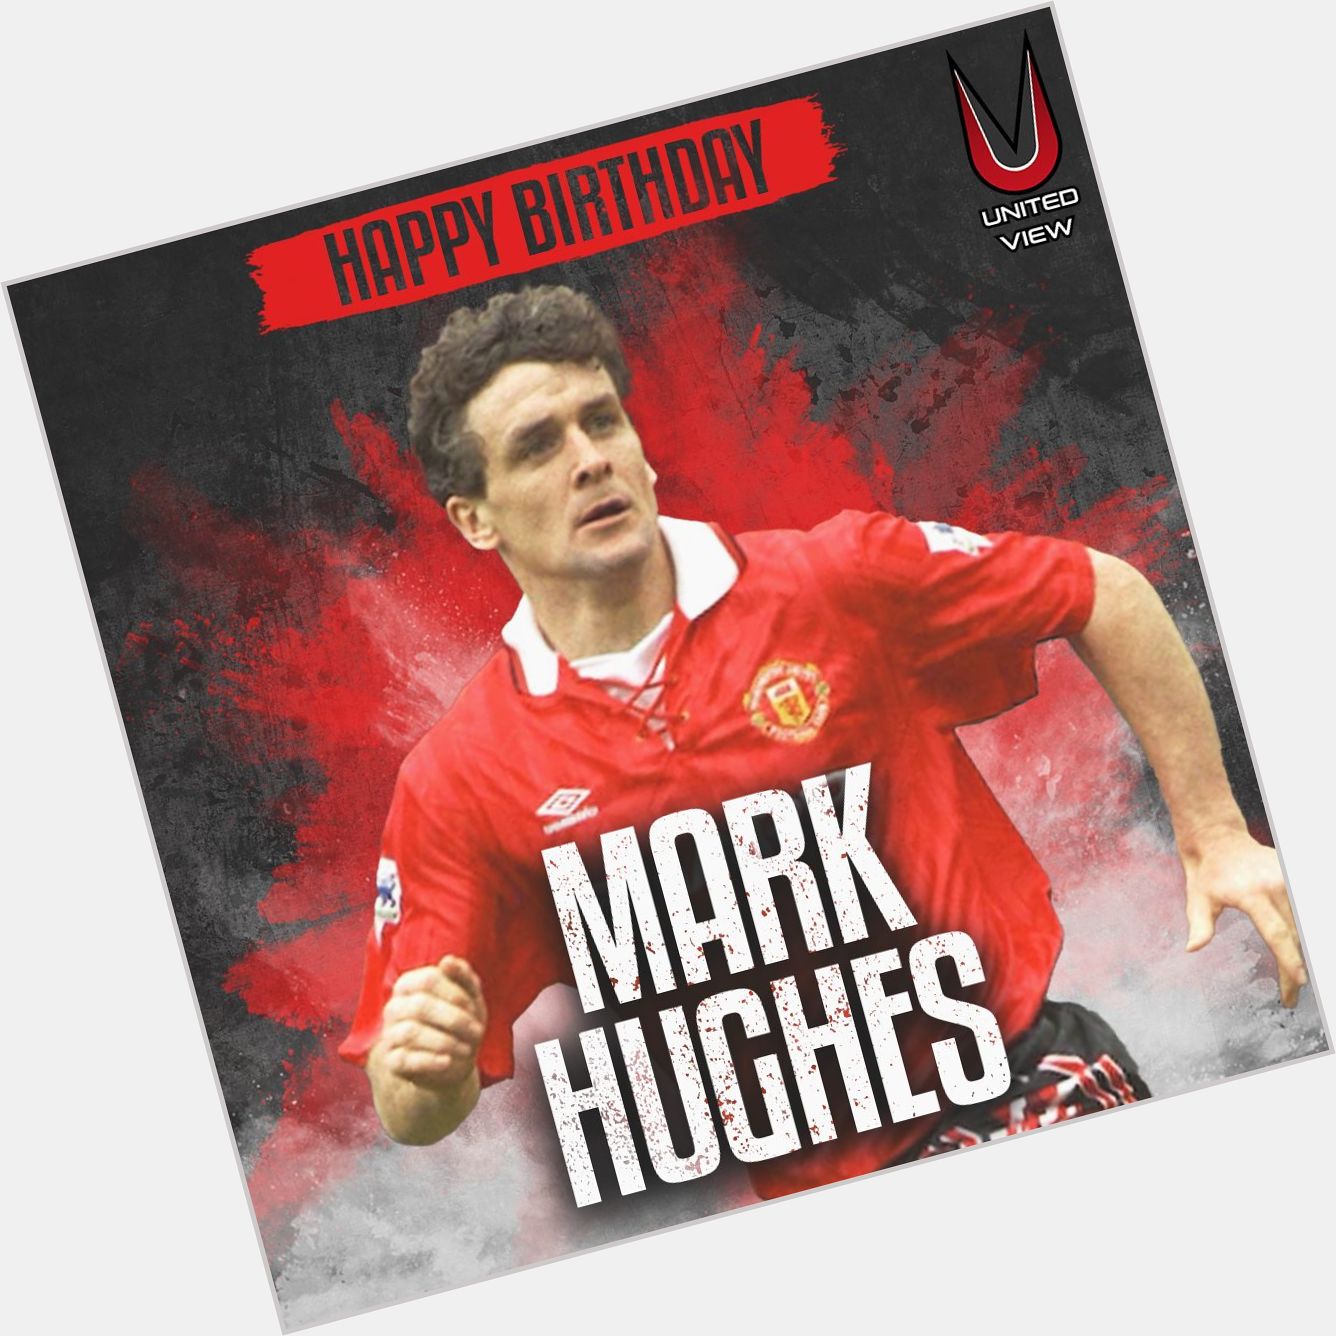 Happy birthday to Mark Hughes!

The former Manchester United forward turns 57 years old today.  